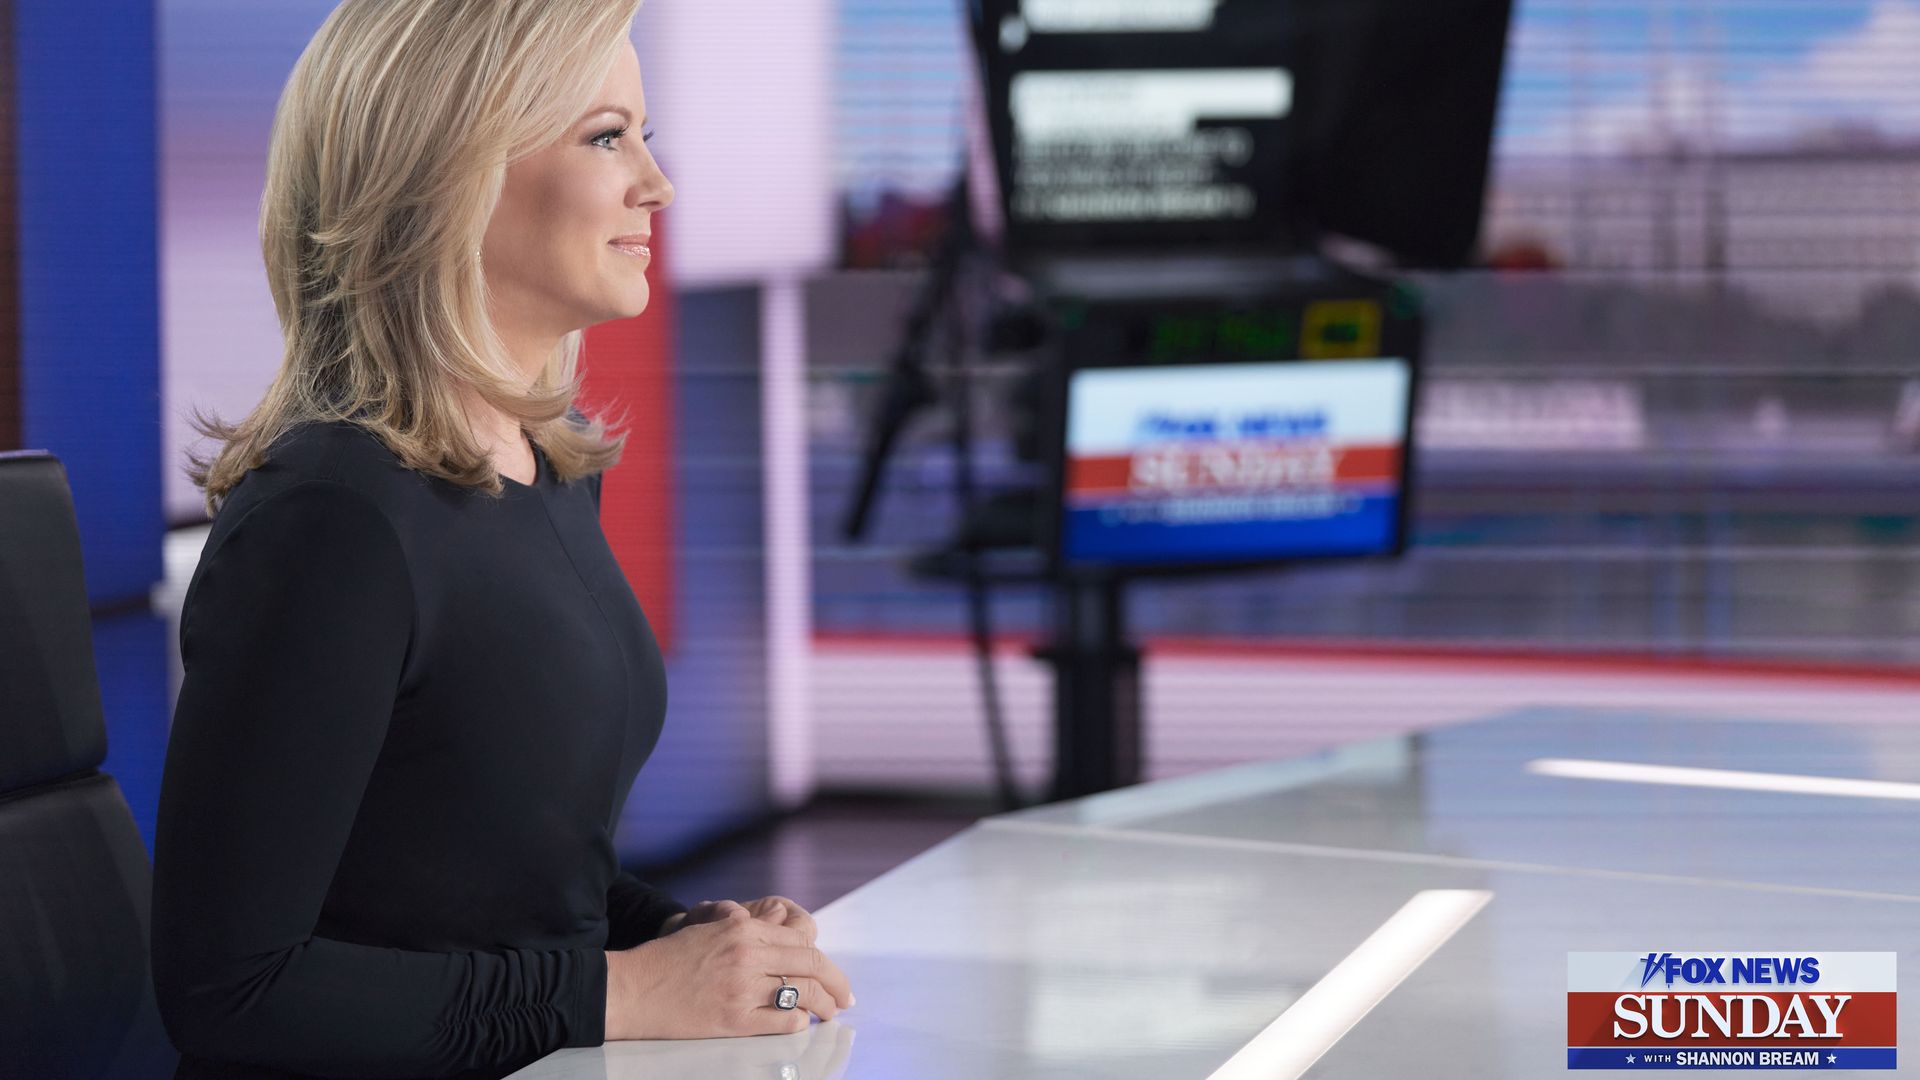 Shannon Bream sits at the anchor desk for 'Fox News Sunday'.